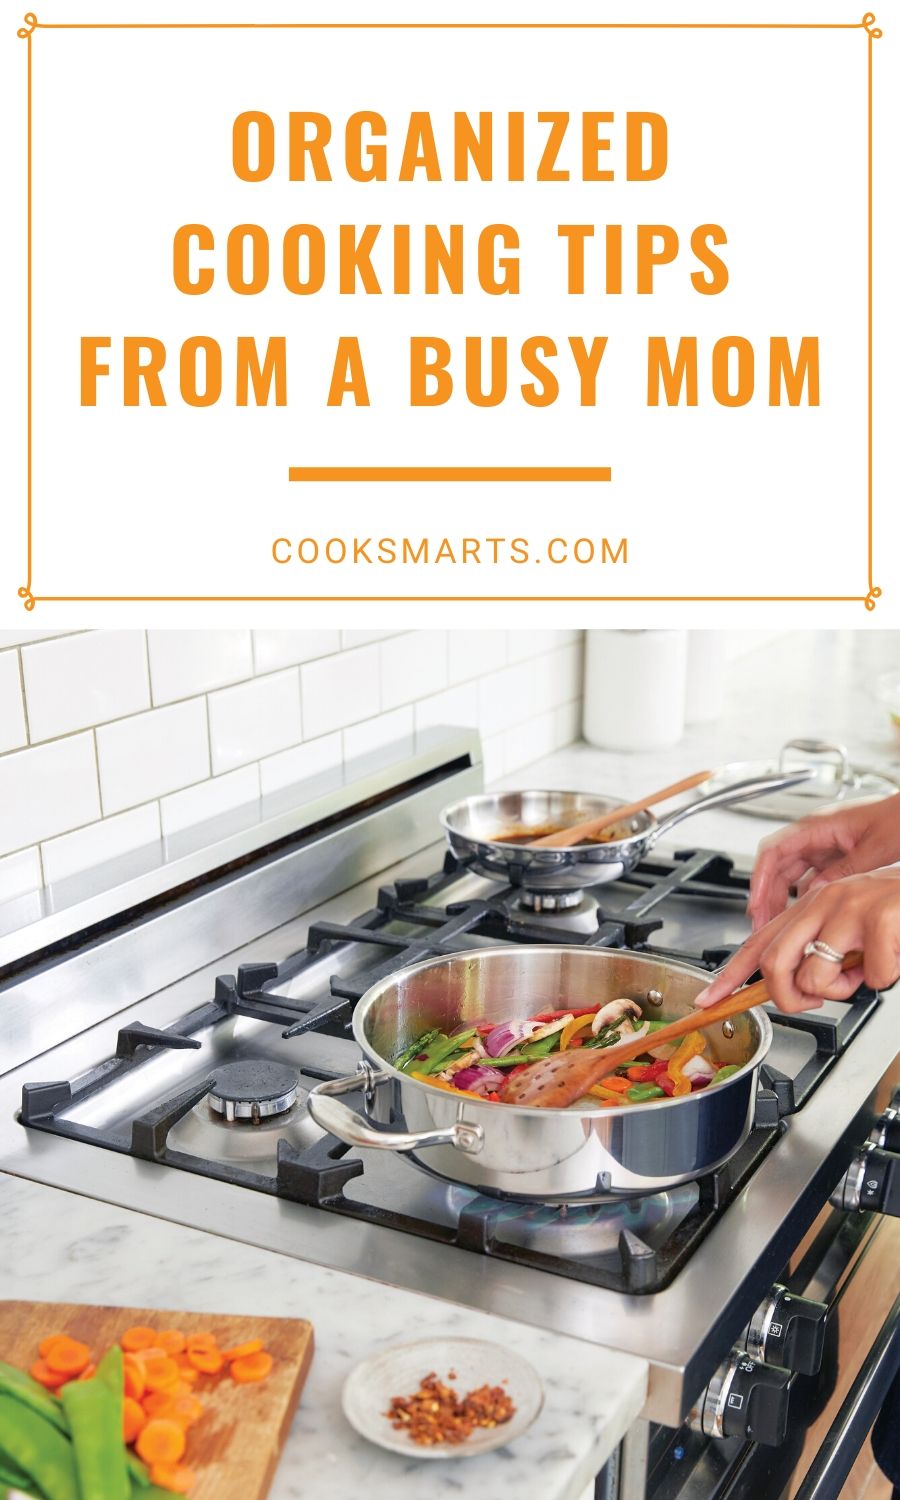 Quick Home Cooking Tips for Families with Kitchen Hero Gabrielle | Cook Smarts